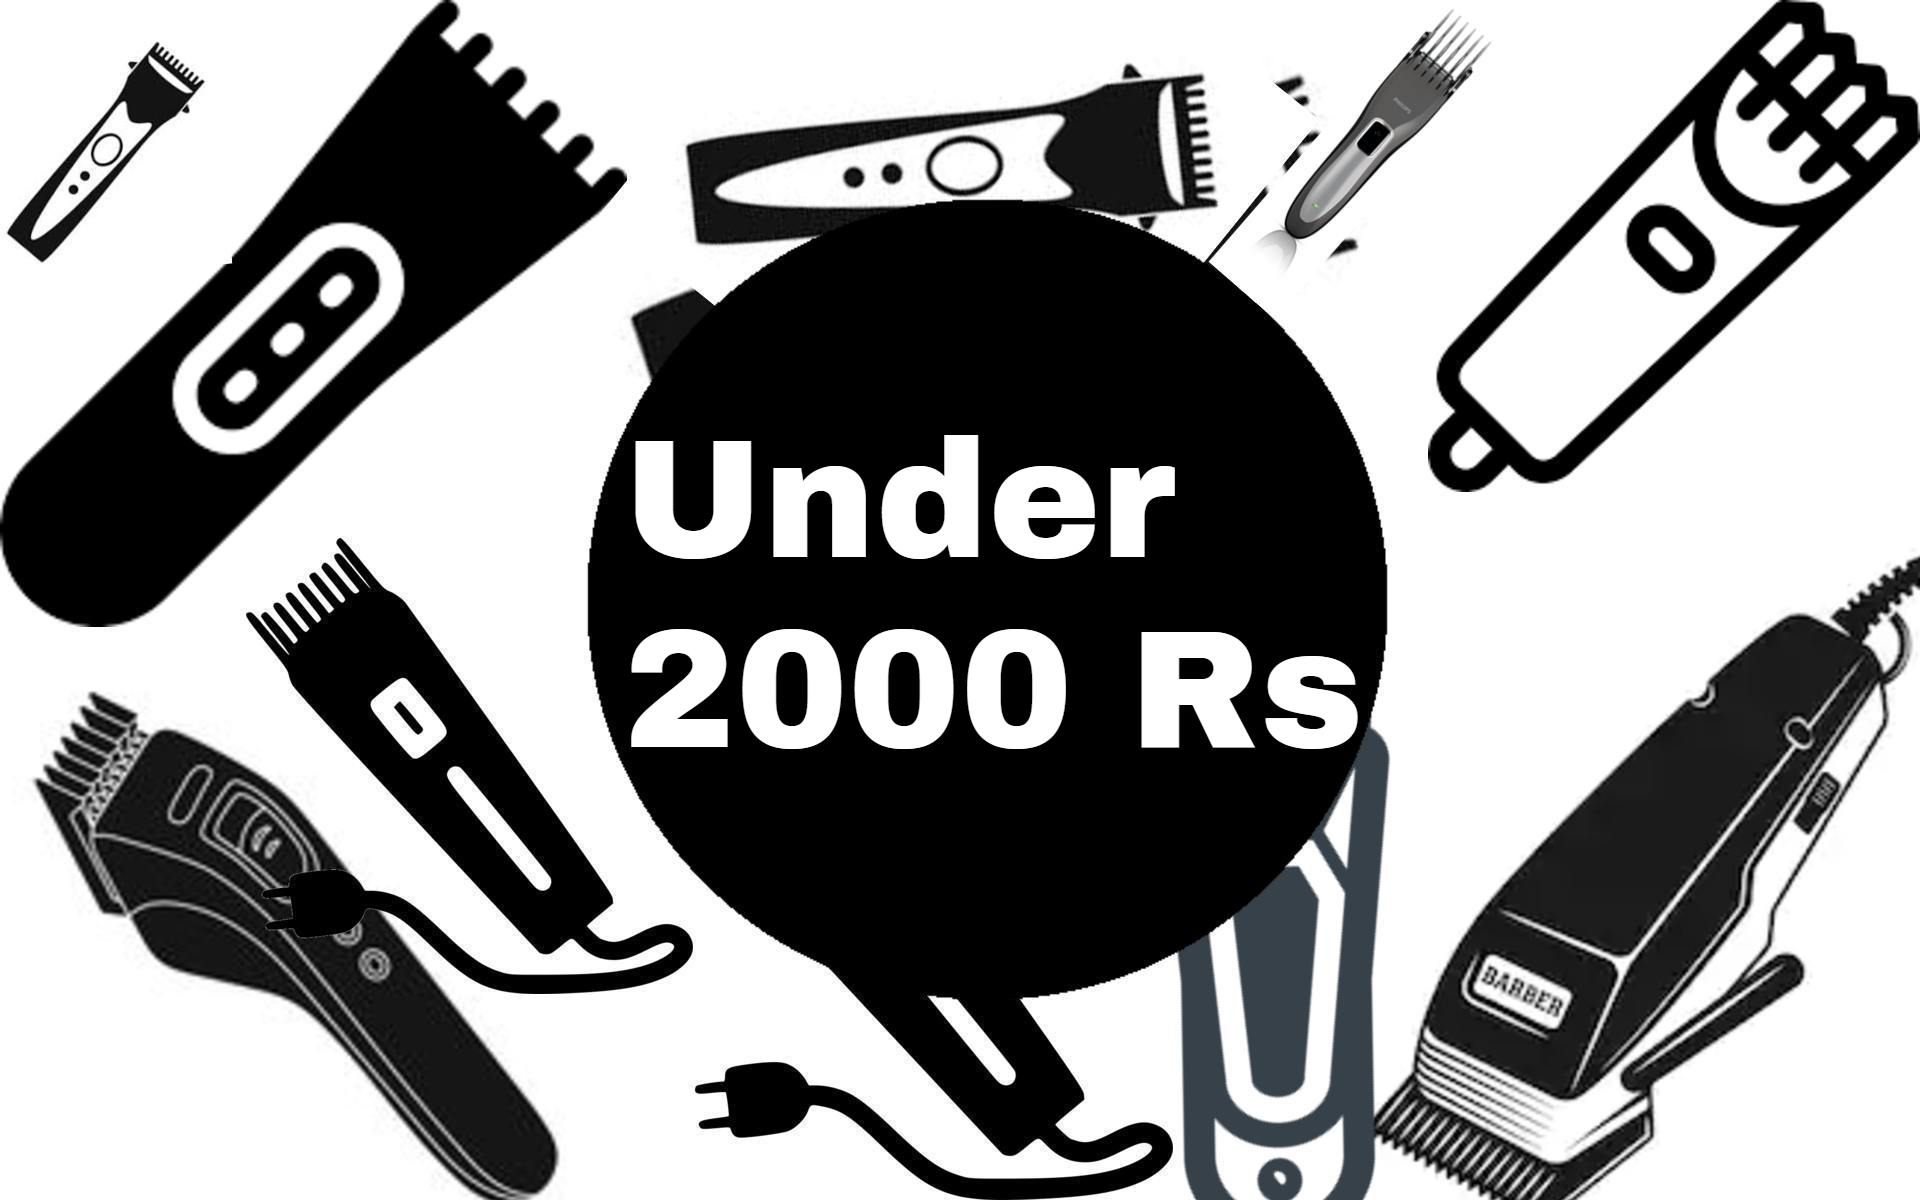 trimmers under 2000 rs